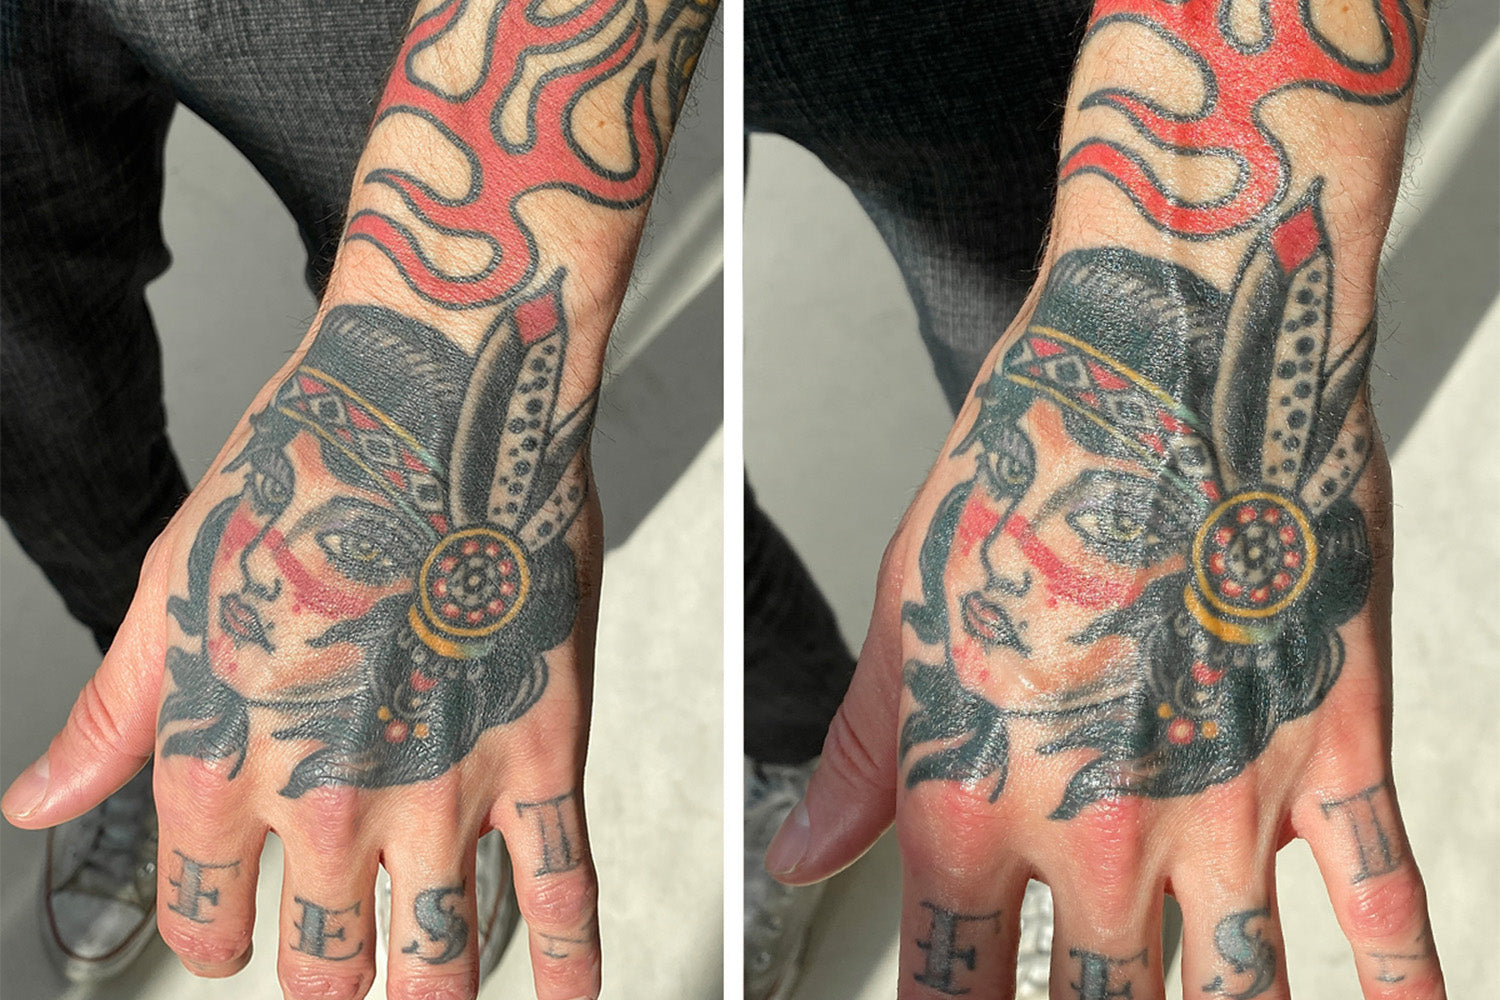 How Long Should You Keep A New Tattoo Wrapped  Covered For   AuthorityTattoo